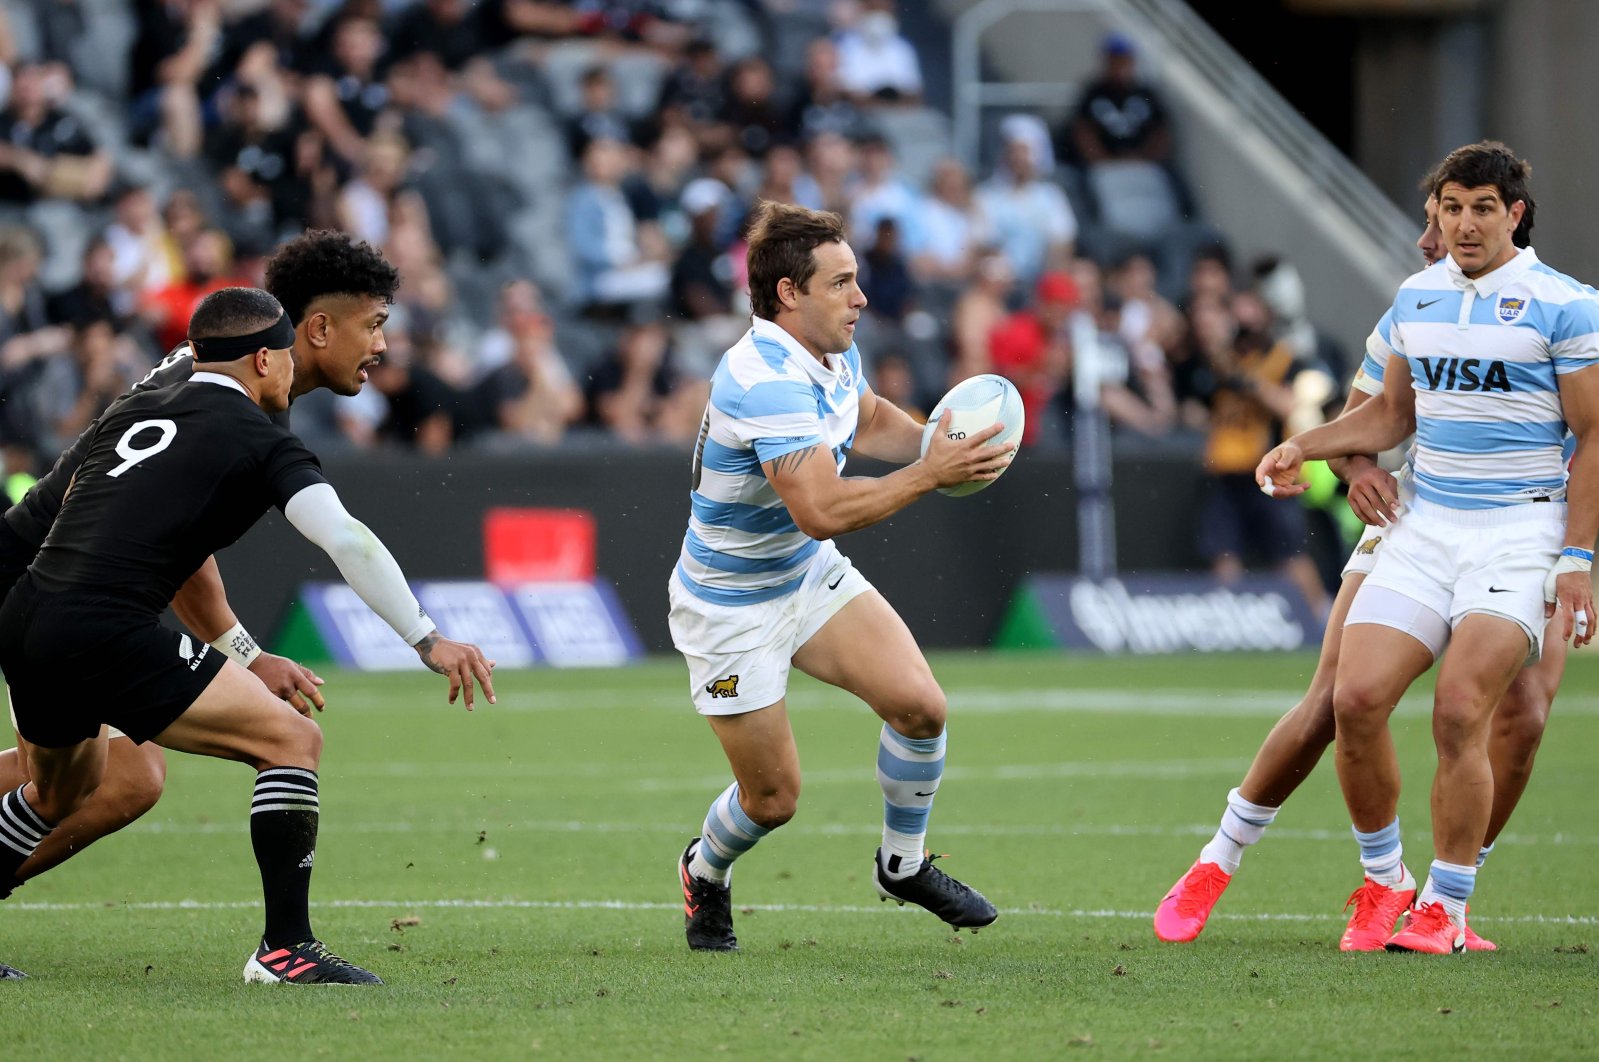 Argentina's Nicolas Sanchez (C) runs with the ball during the 2020 Tri Nations rugby match between New Zealand and Argentina at Bankwest Stadium in Sydney, Australia, Nov. 14, 2020. (AFP Photo)